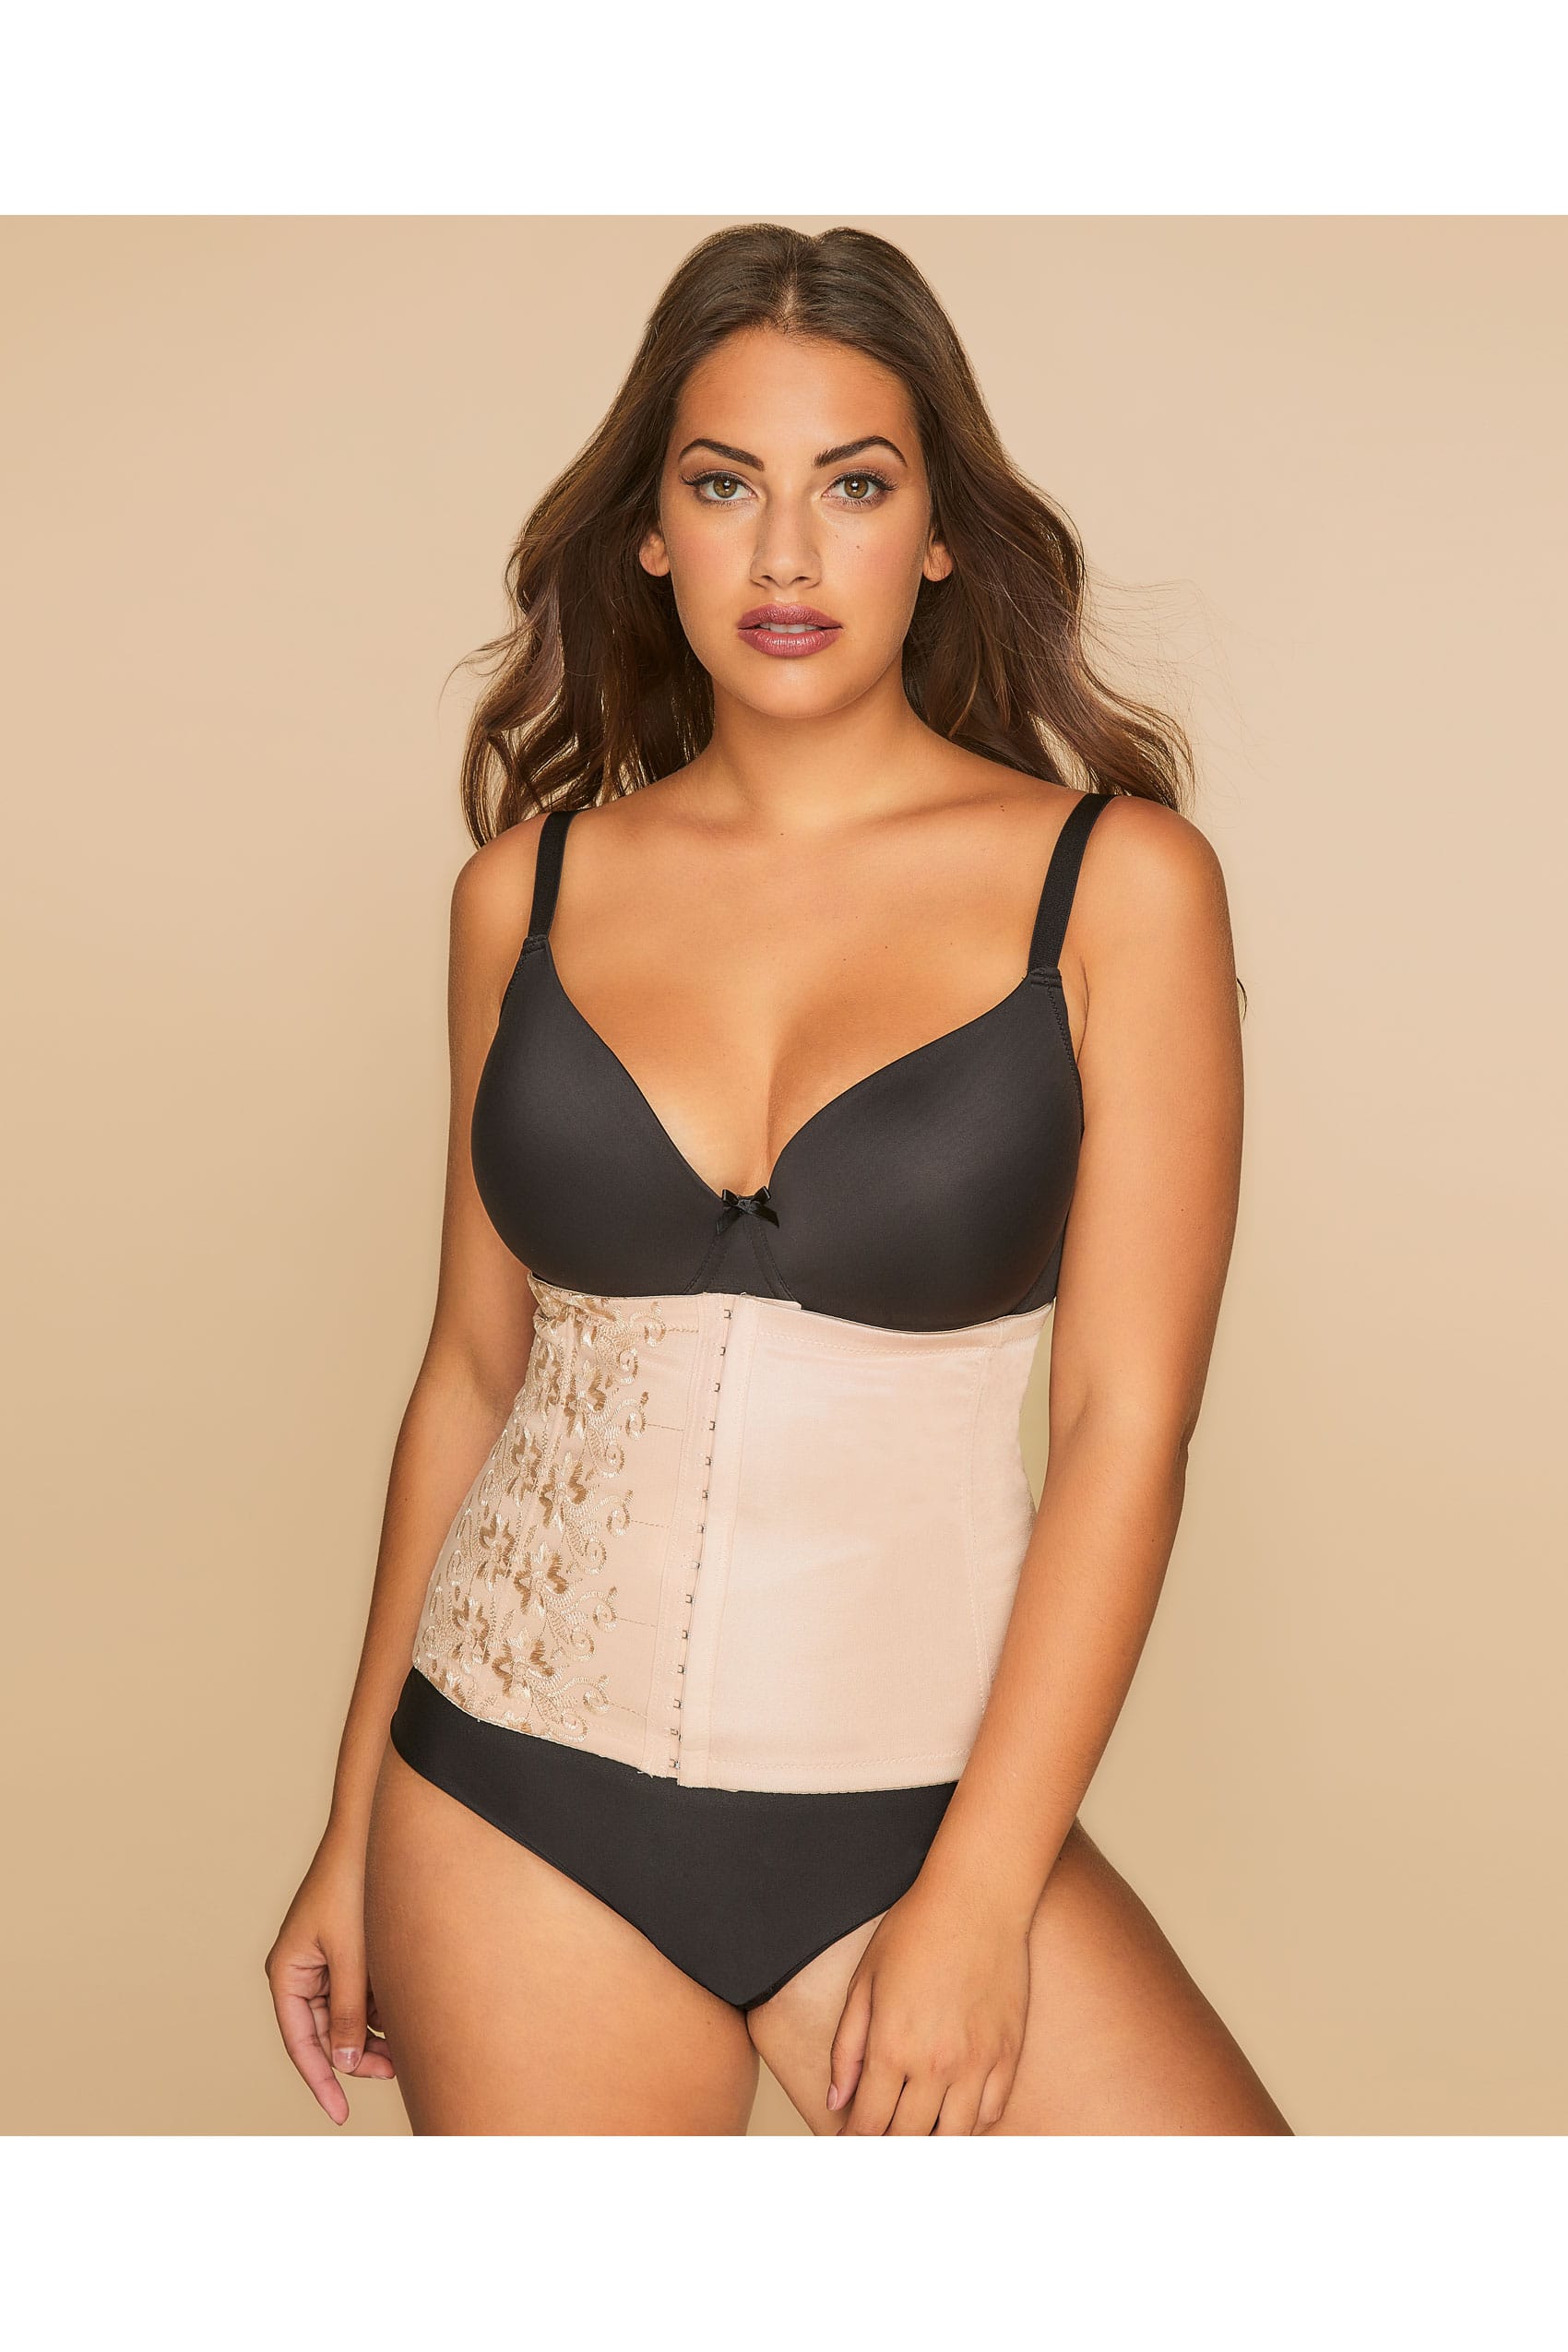 Nude TUMMY CONTROL Band Plus Size 16 to 30